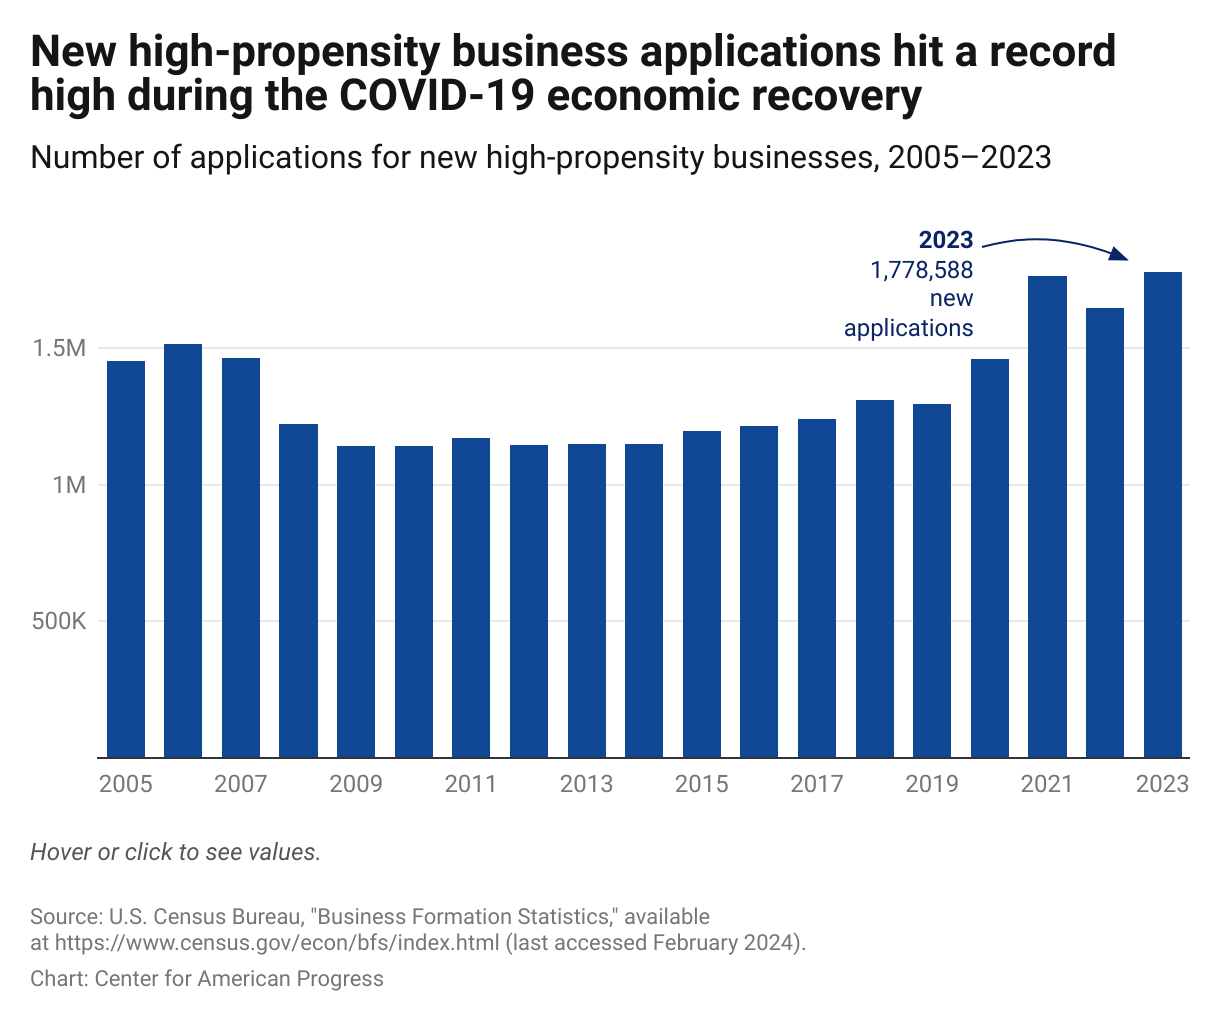 Line graph showing the recent dramatic increase in new high-propensity business applications during the COVID-19 economic recovery, in comparison with declines during the Great Recession.